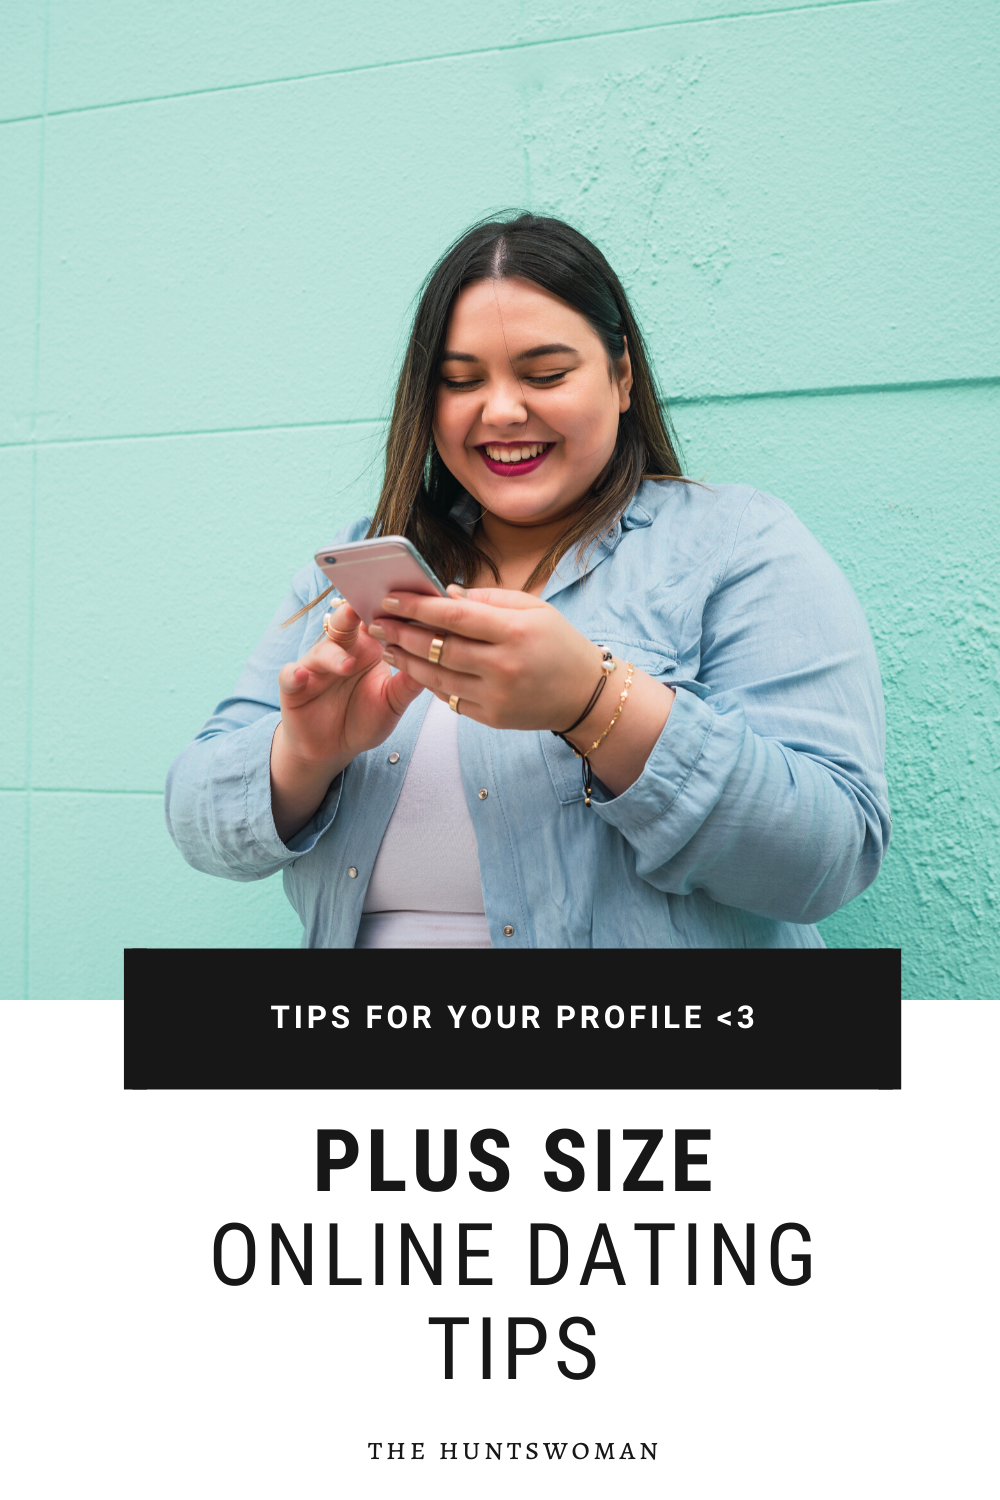 Plus size dating